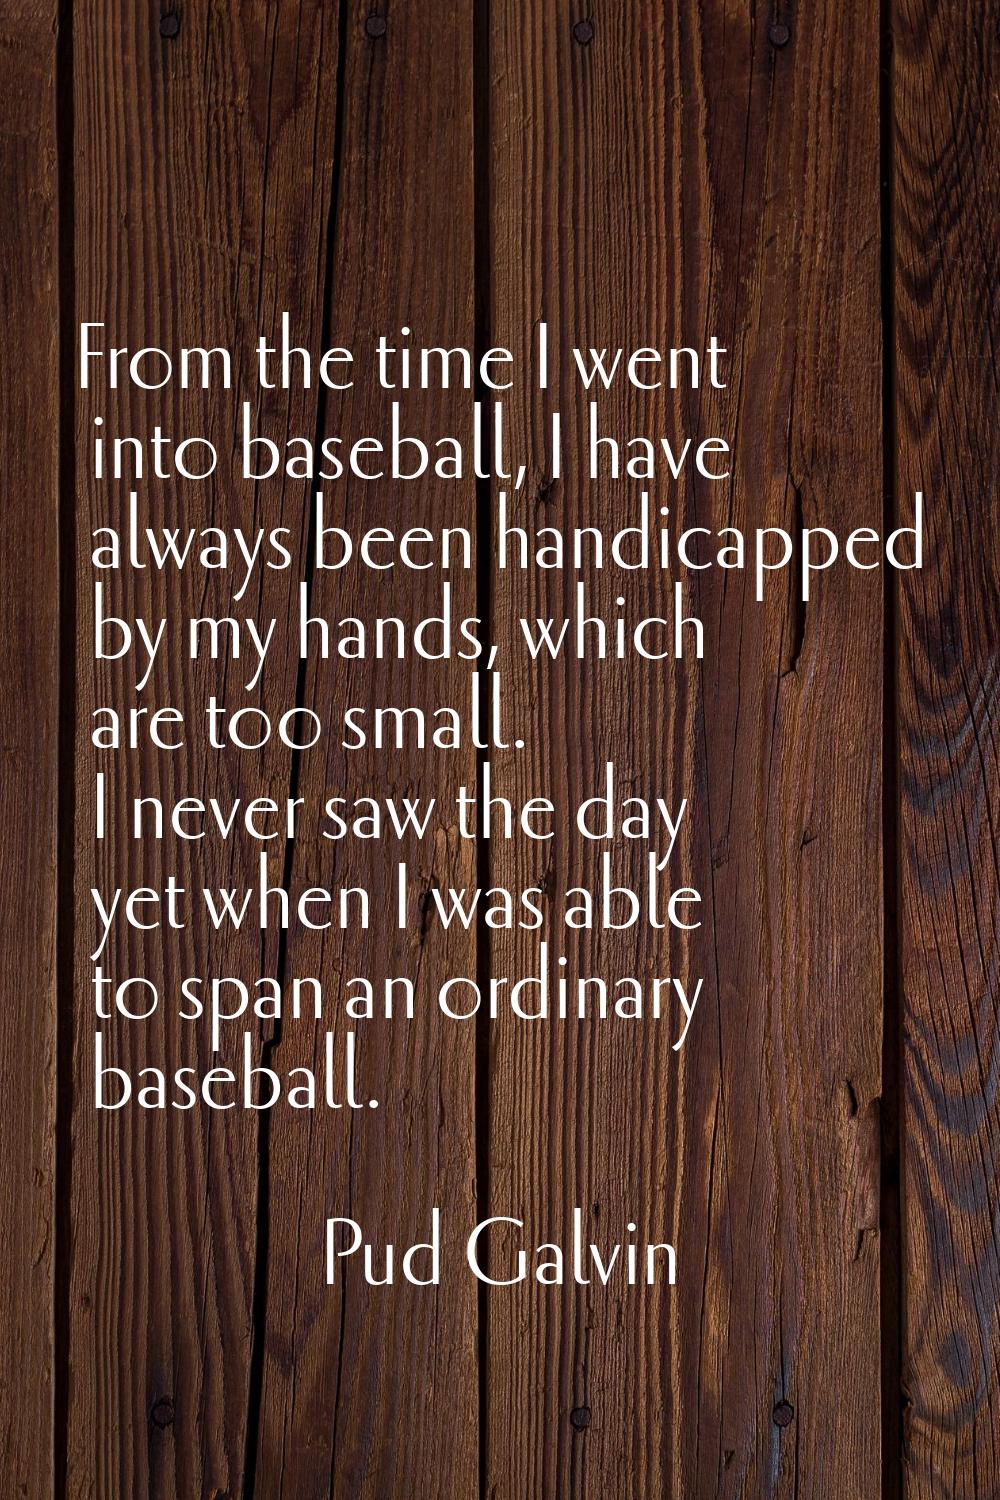 From the time I went into baseball, I have always been handicapped by my hands, which are too small